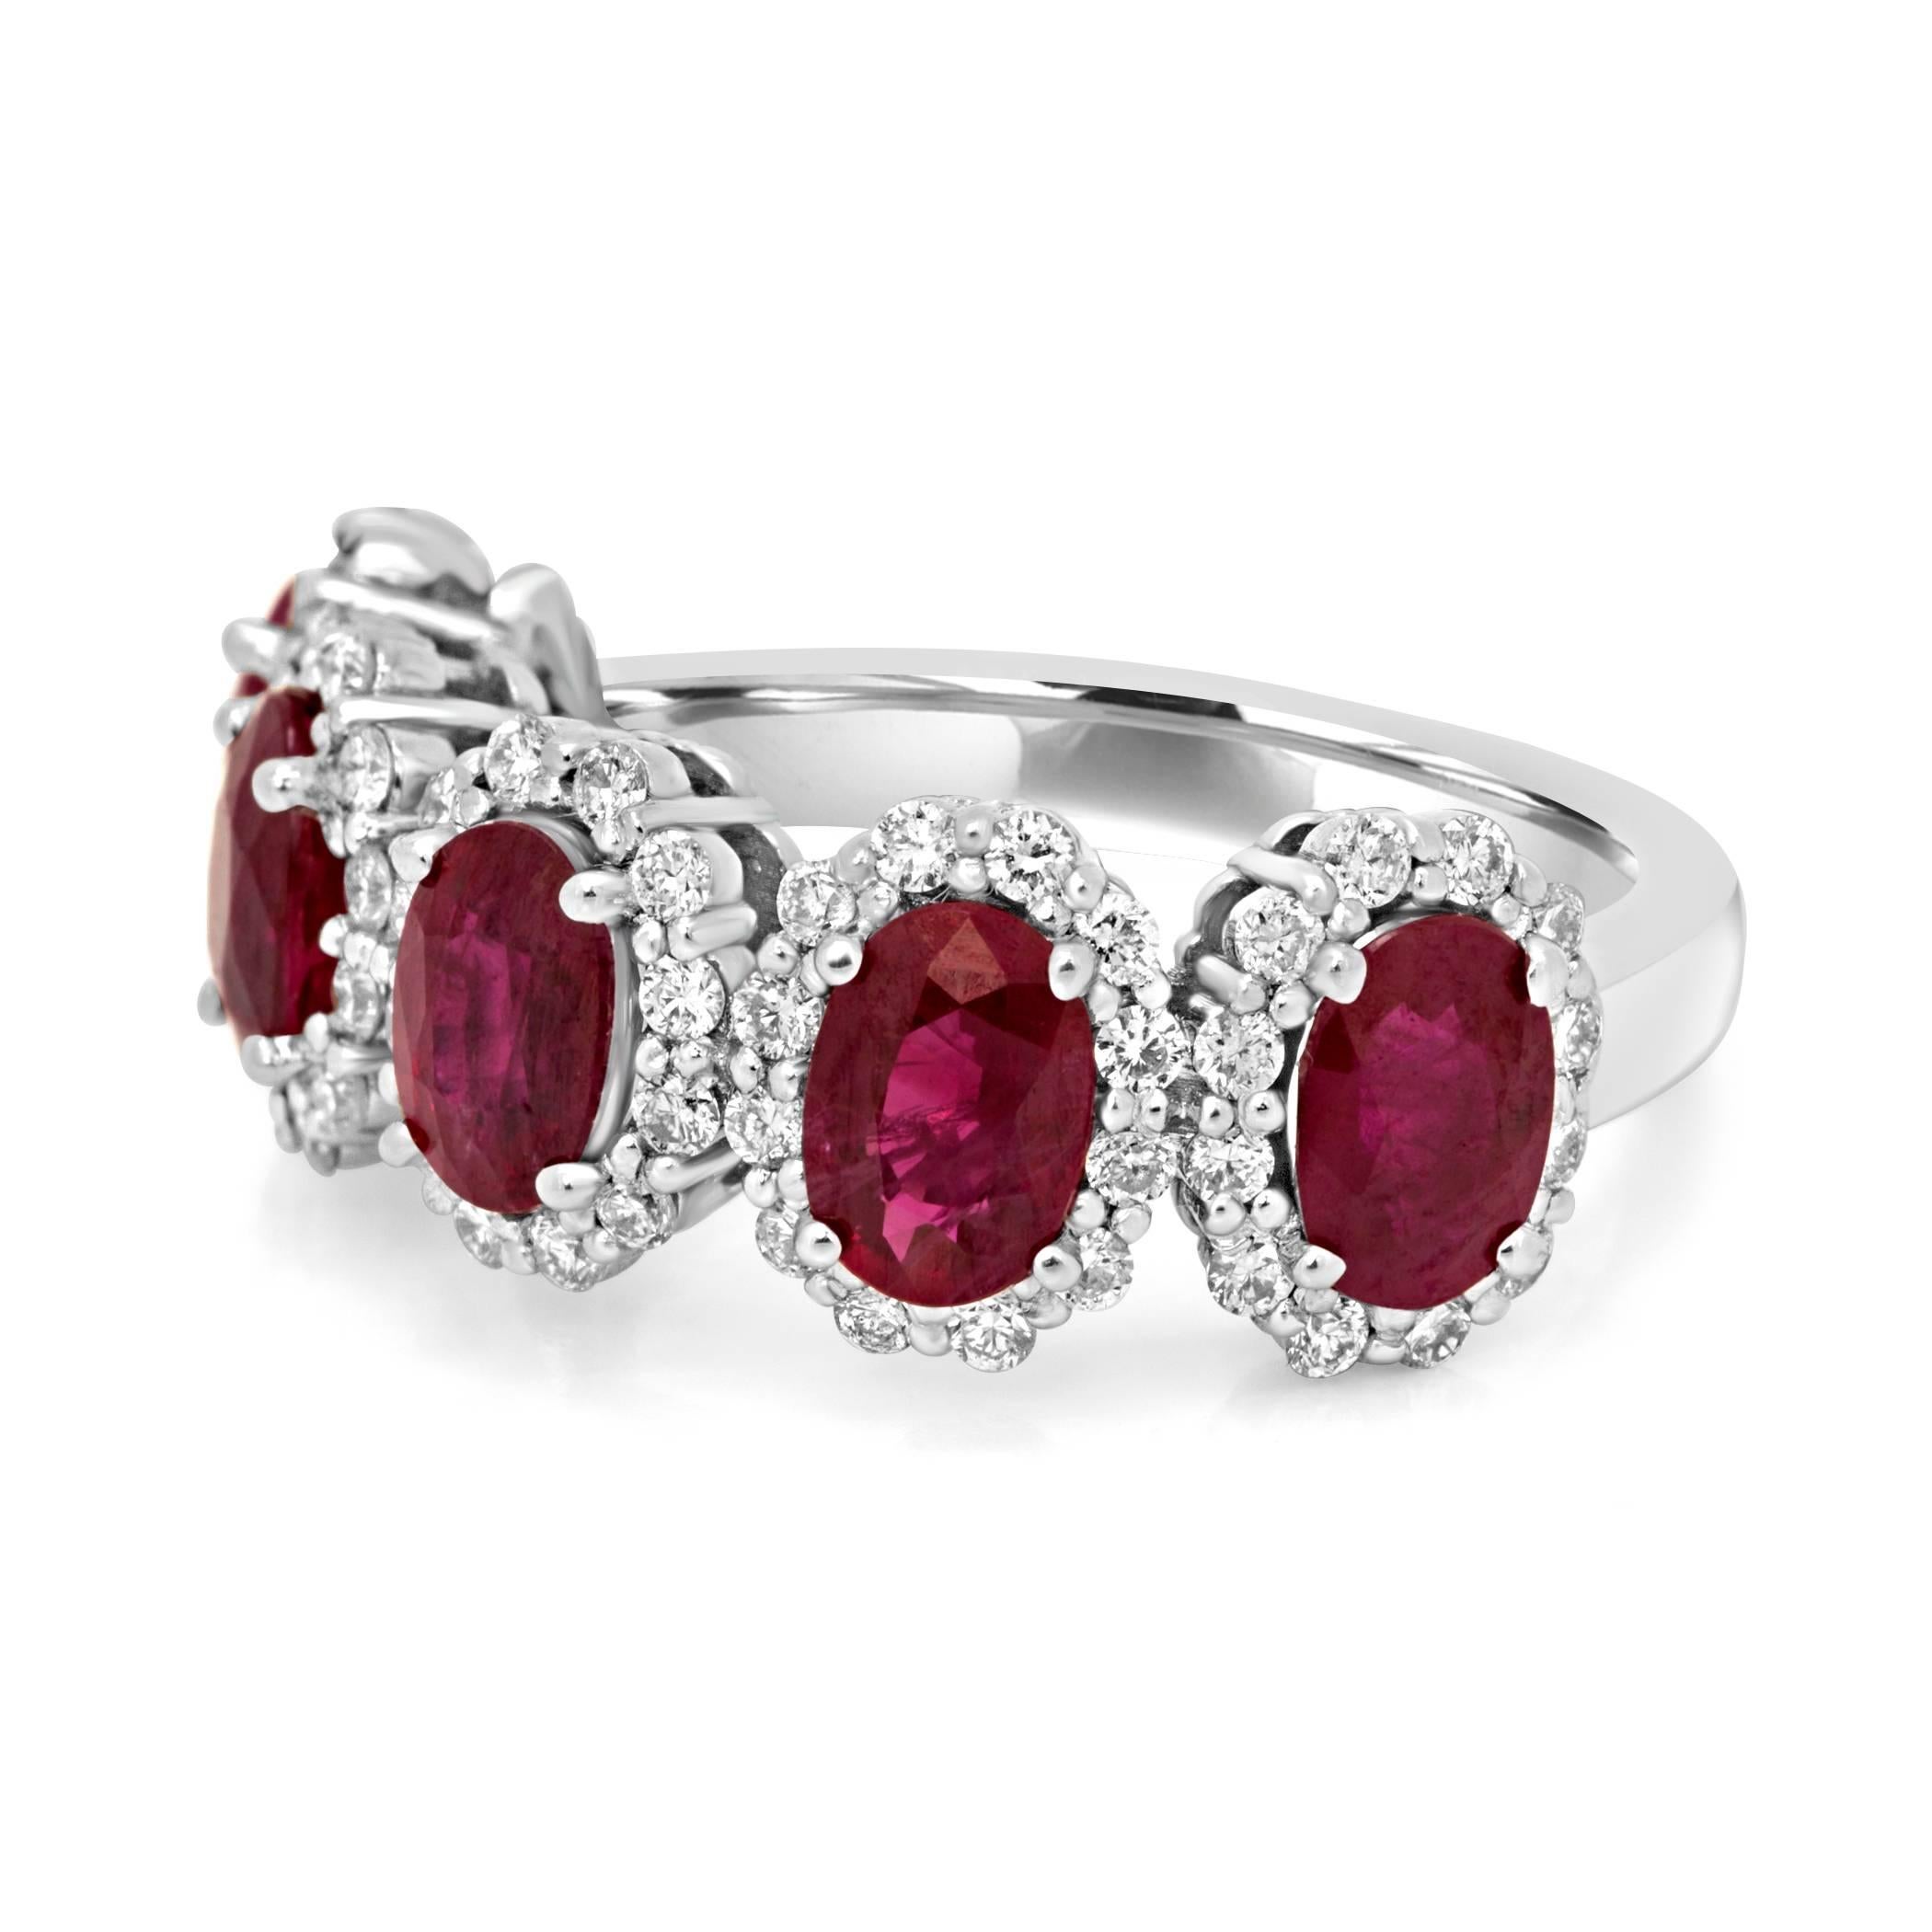 5 Natural Oval Burma Ruby 3.60 Carat encircled in halo of White Diamond Round 0.62 Carat in 14K White Gold Fashion Cocktail Band Ring.

Style available in different price ranges. Prices are based on your selection of 4C's Cut, Color, Carat, Clarity.